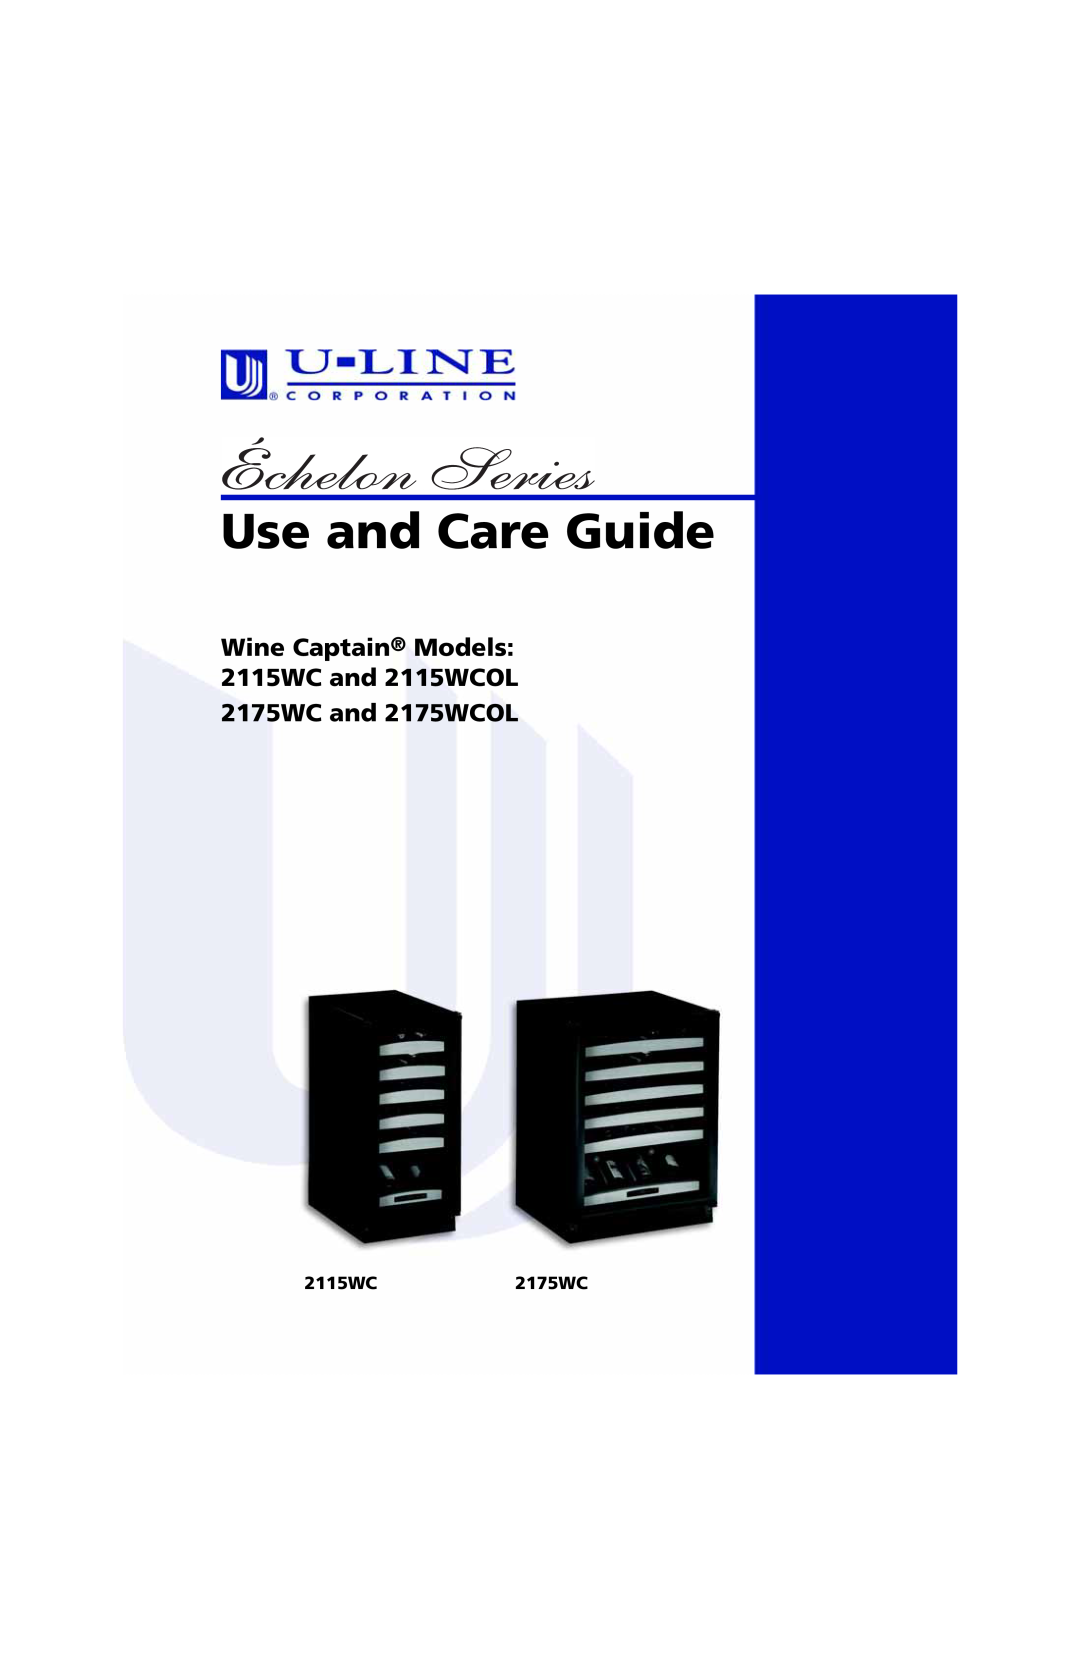 U-Line manual 2115WC2175WC, Use and Care Guide, Wine Captain Models 2115WC and 2115WCOL 2175WC and 2175WCOL 